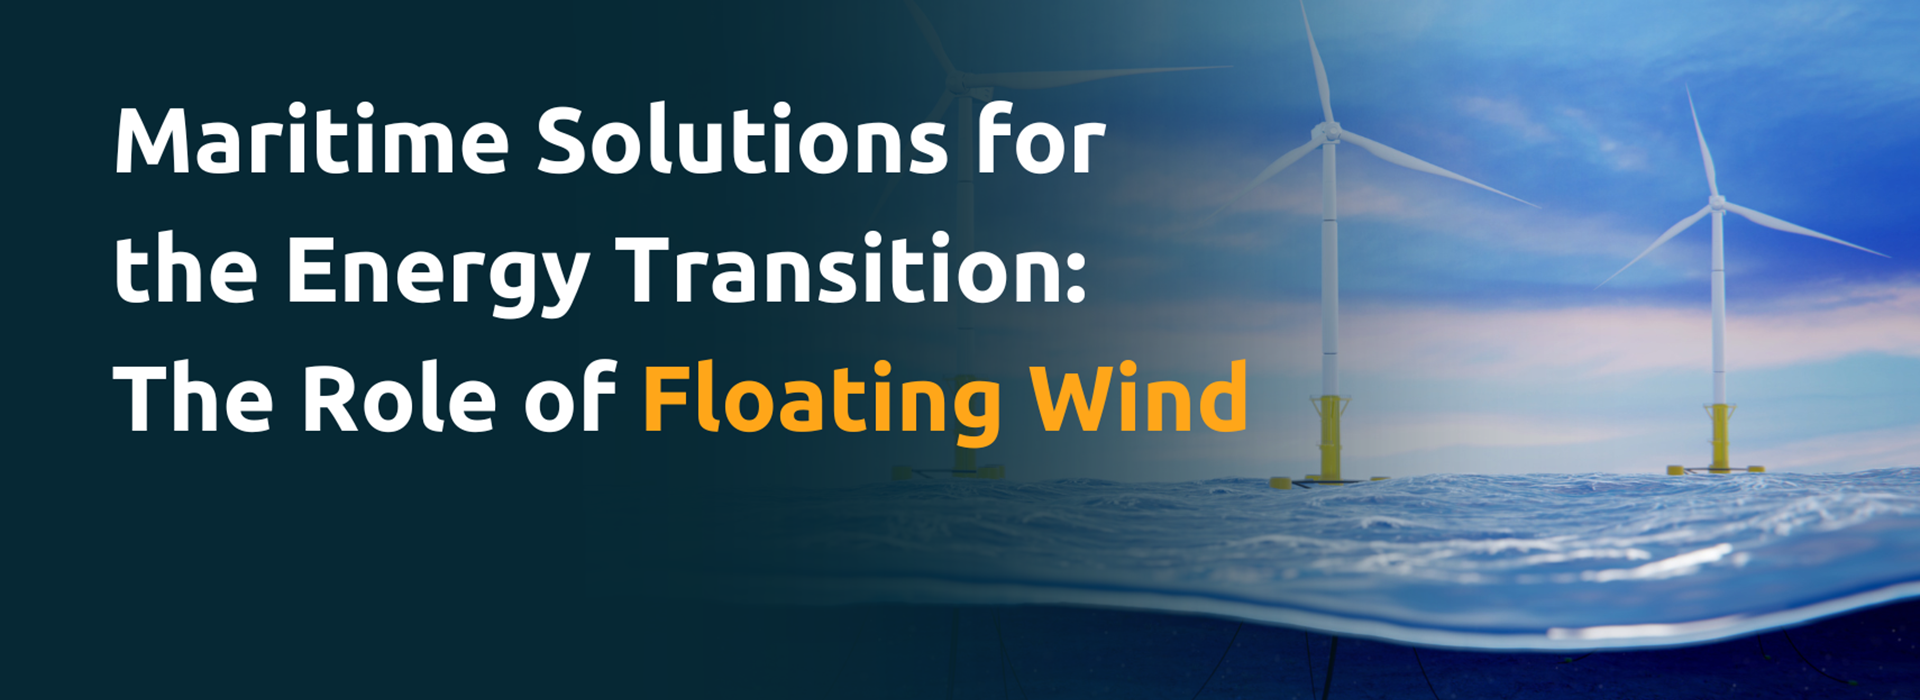 Maritime Solutions For The Energy Transition The Role Of Floating Wind Article Thumbnail